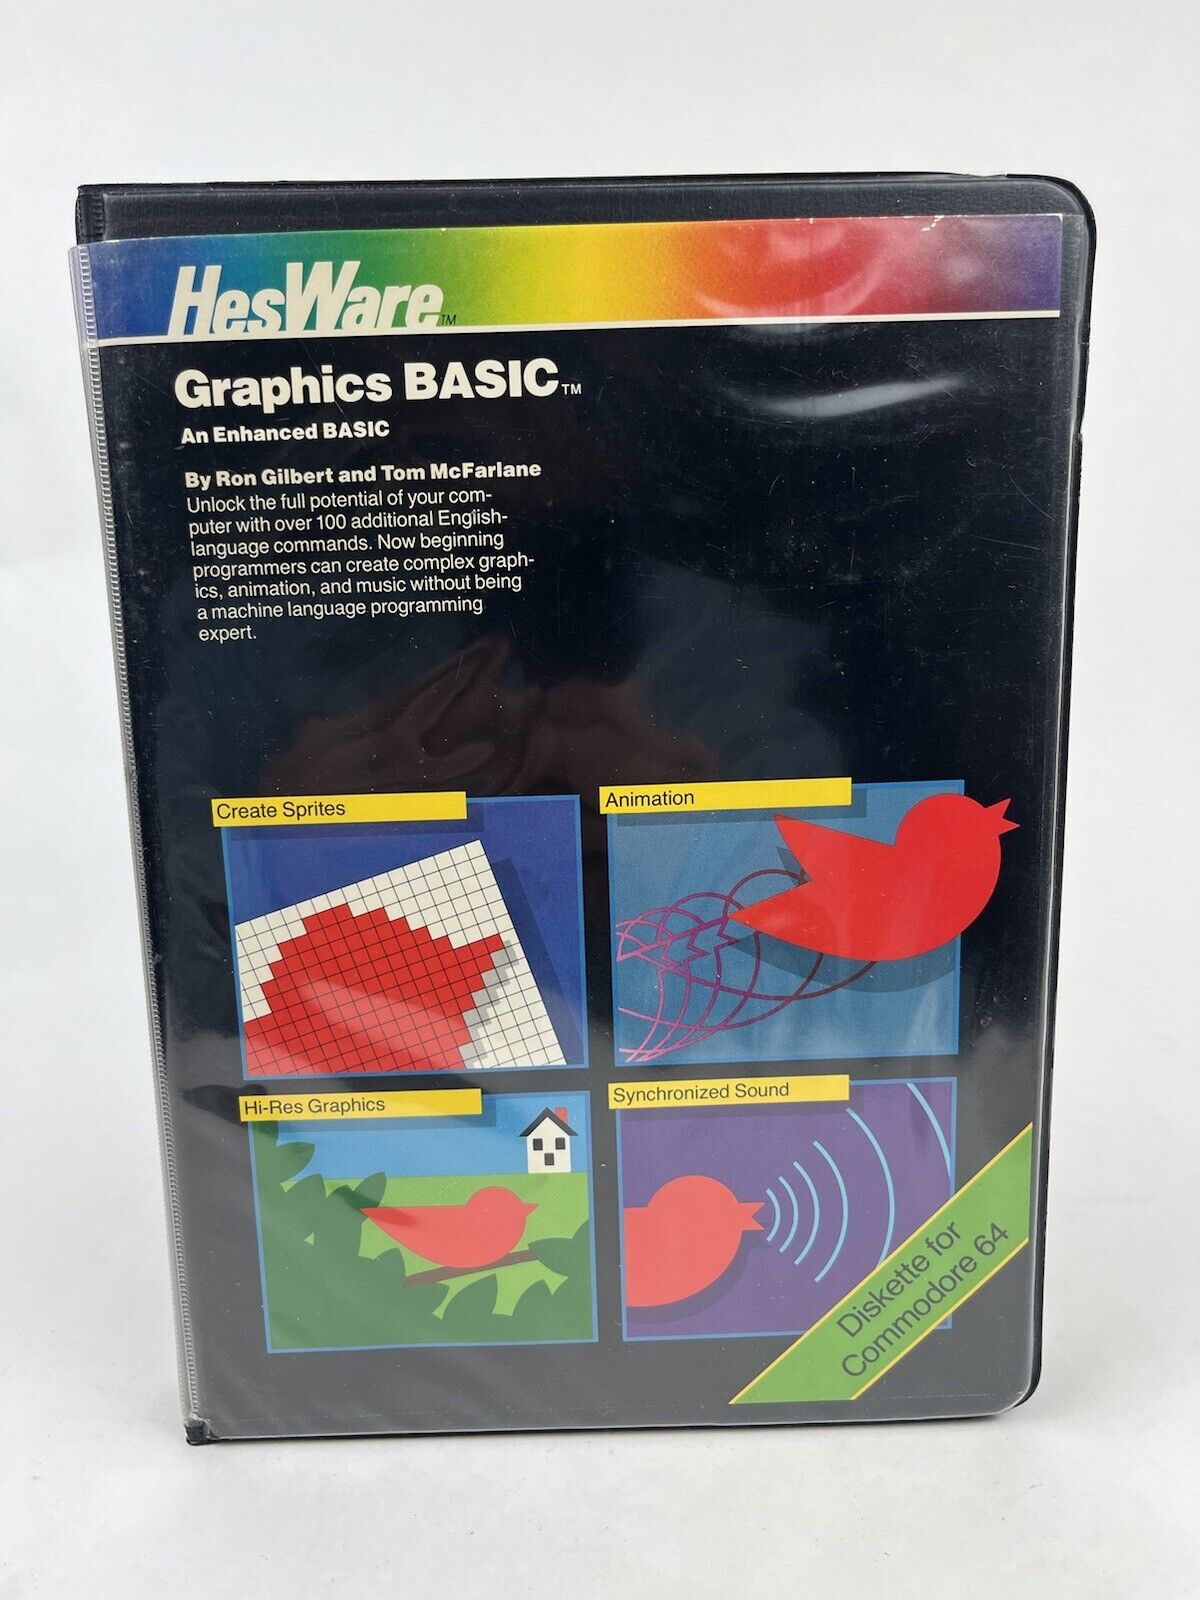 Vintage Commodore GRAPHICS BASIC Software by HesWare